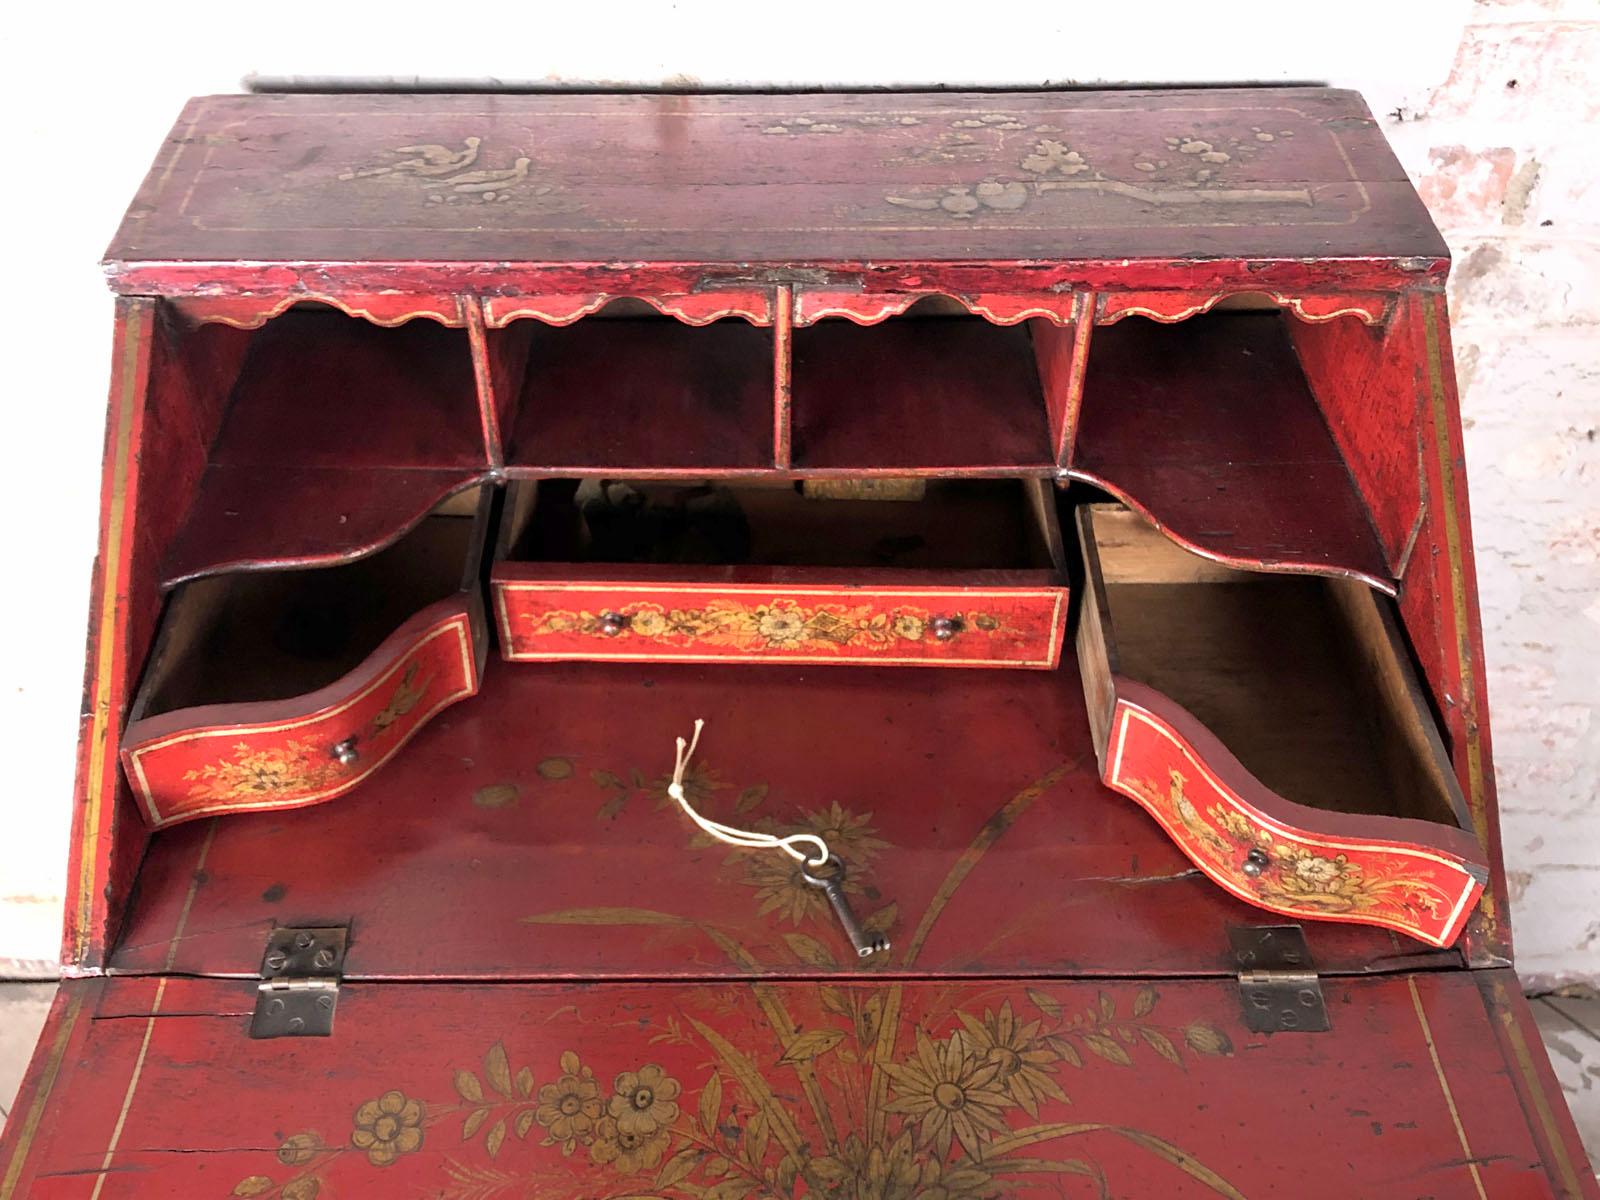 English Queen Anne, Early 18th Century Red Chinoiserie Lacquer Desk / Commode For Sale 6